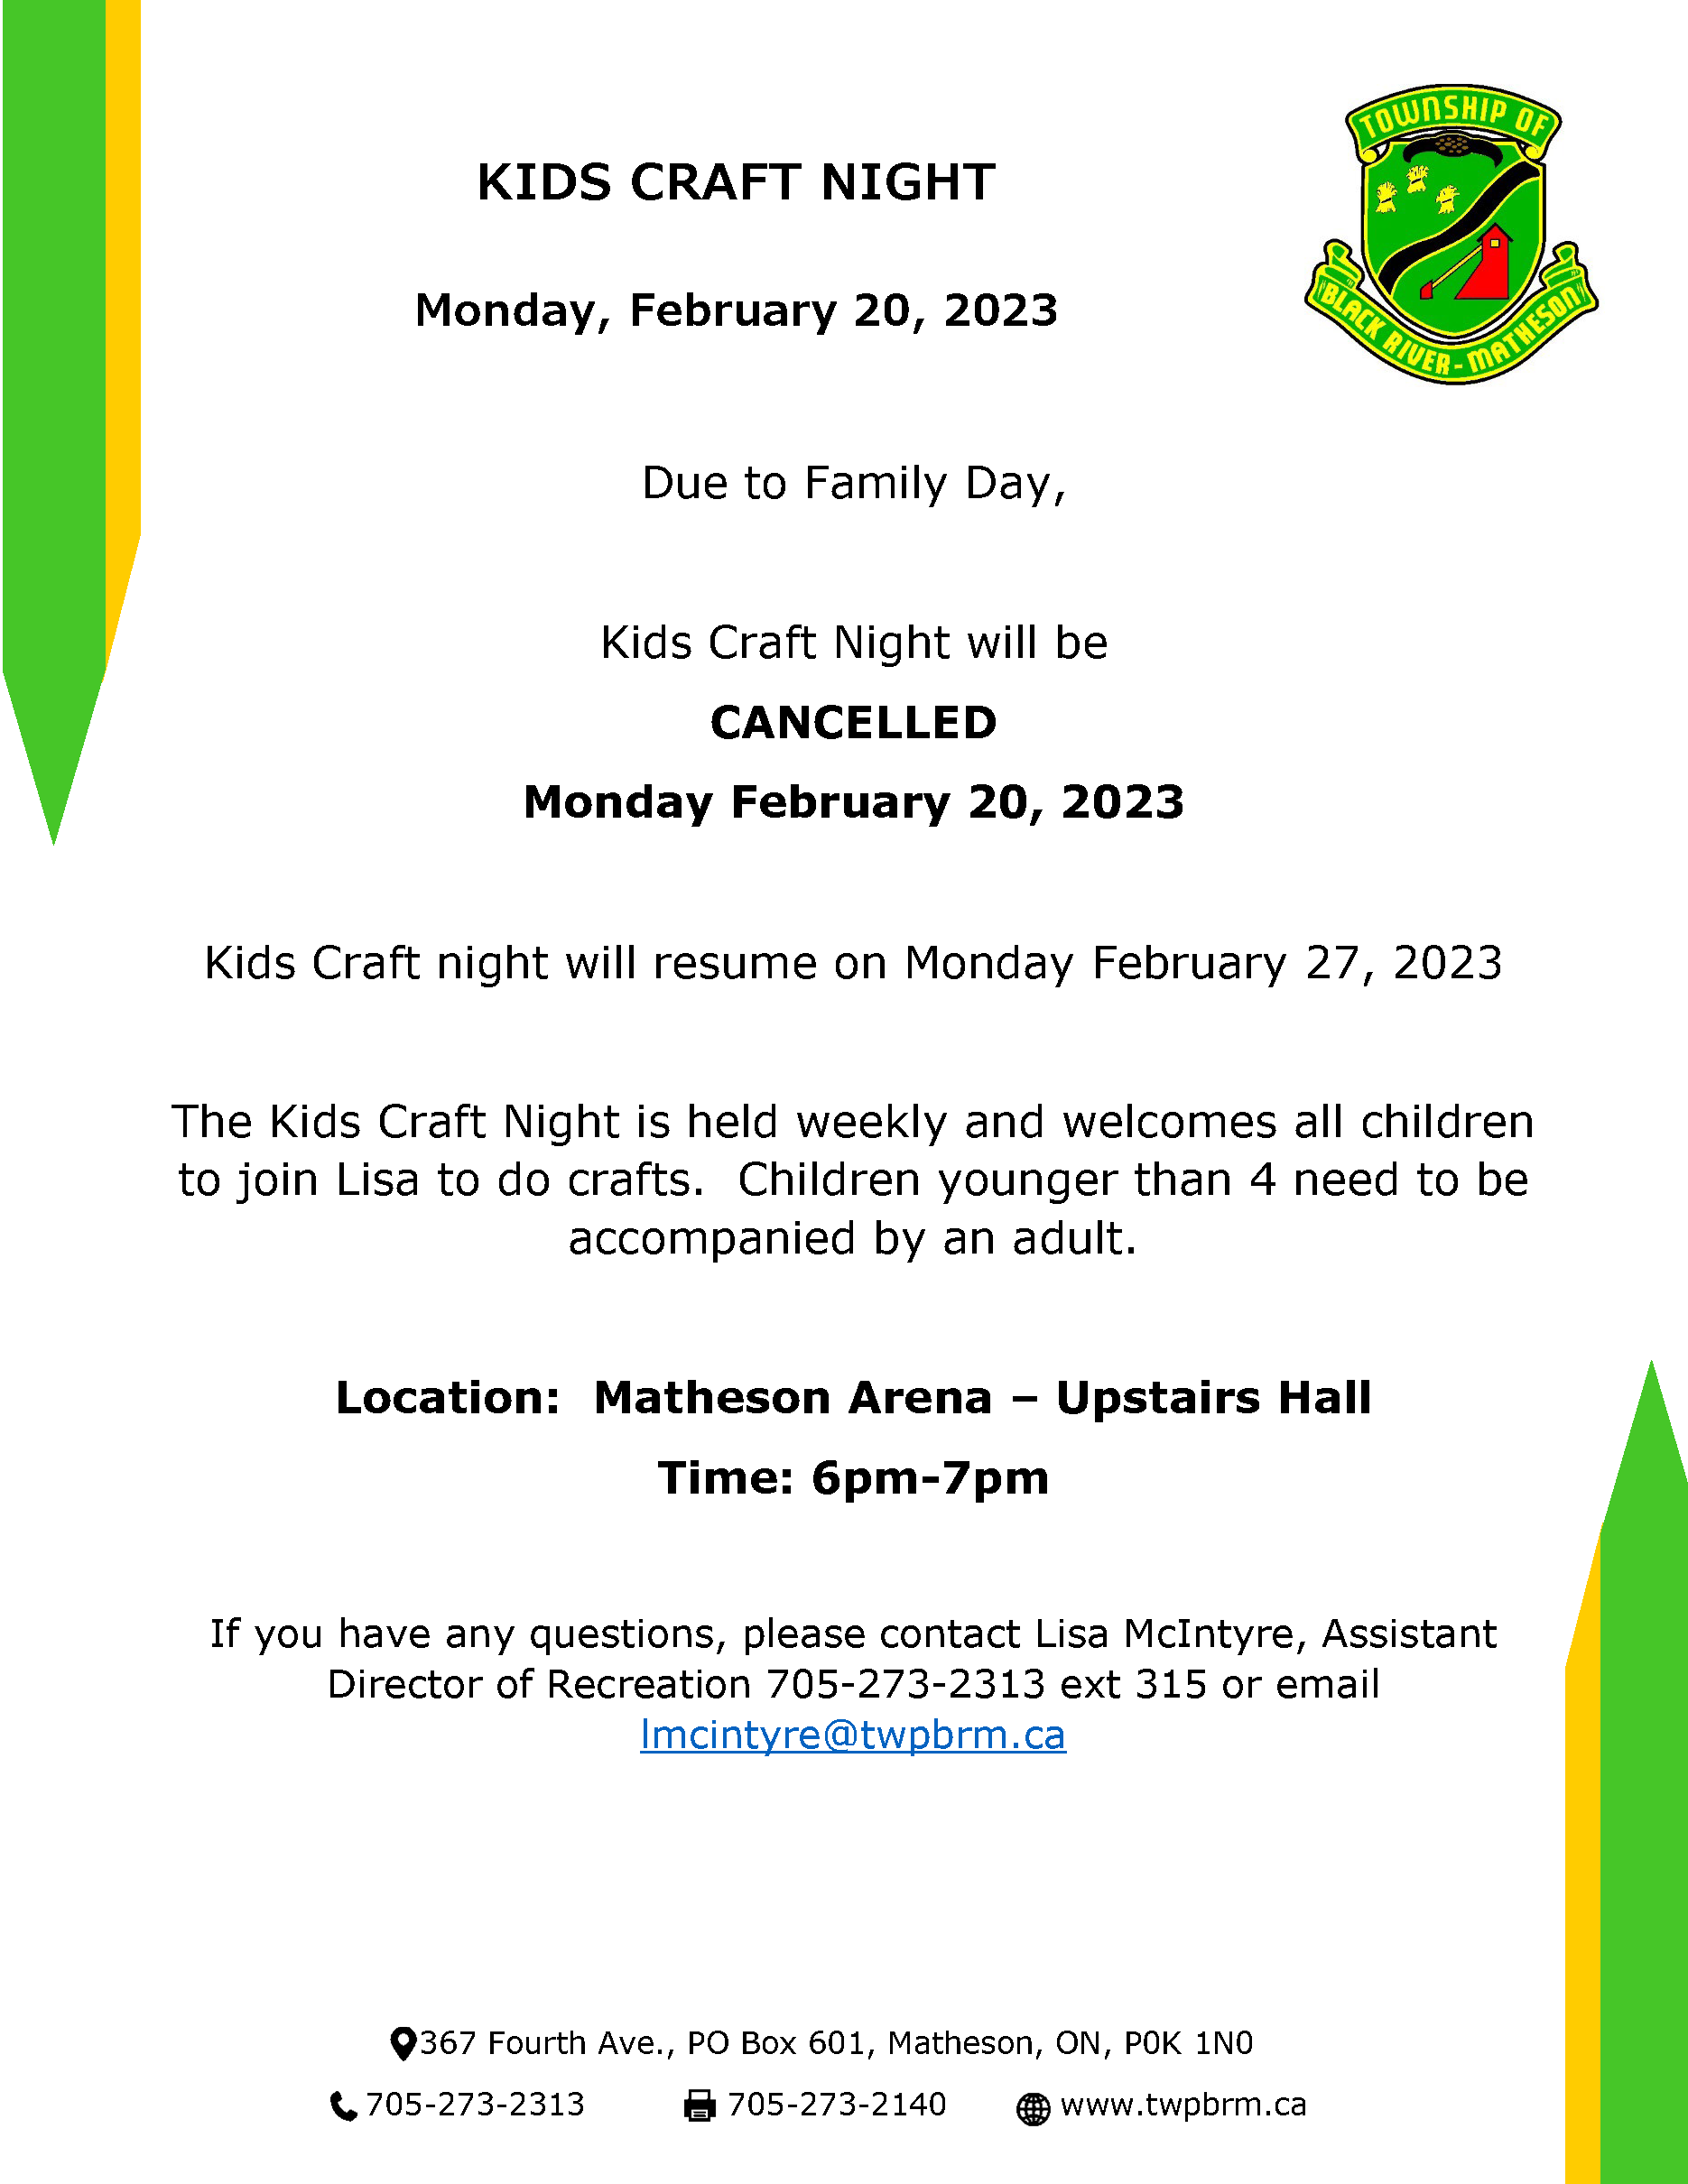 Kids Craft Night Family Day Cancelled